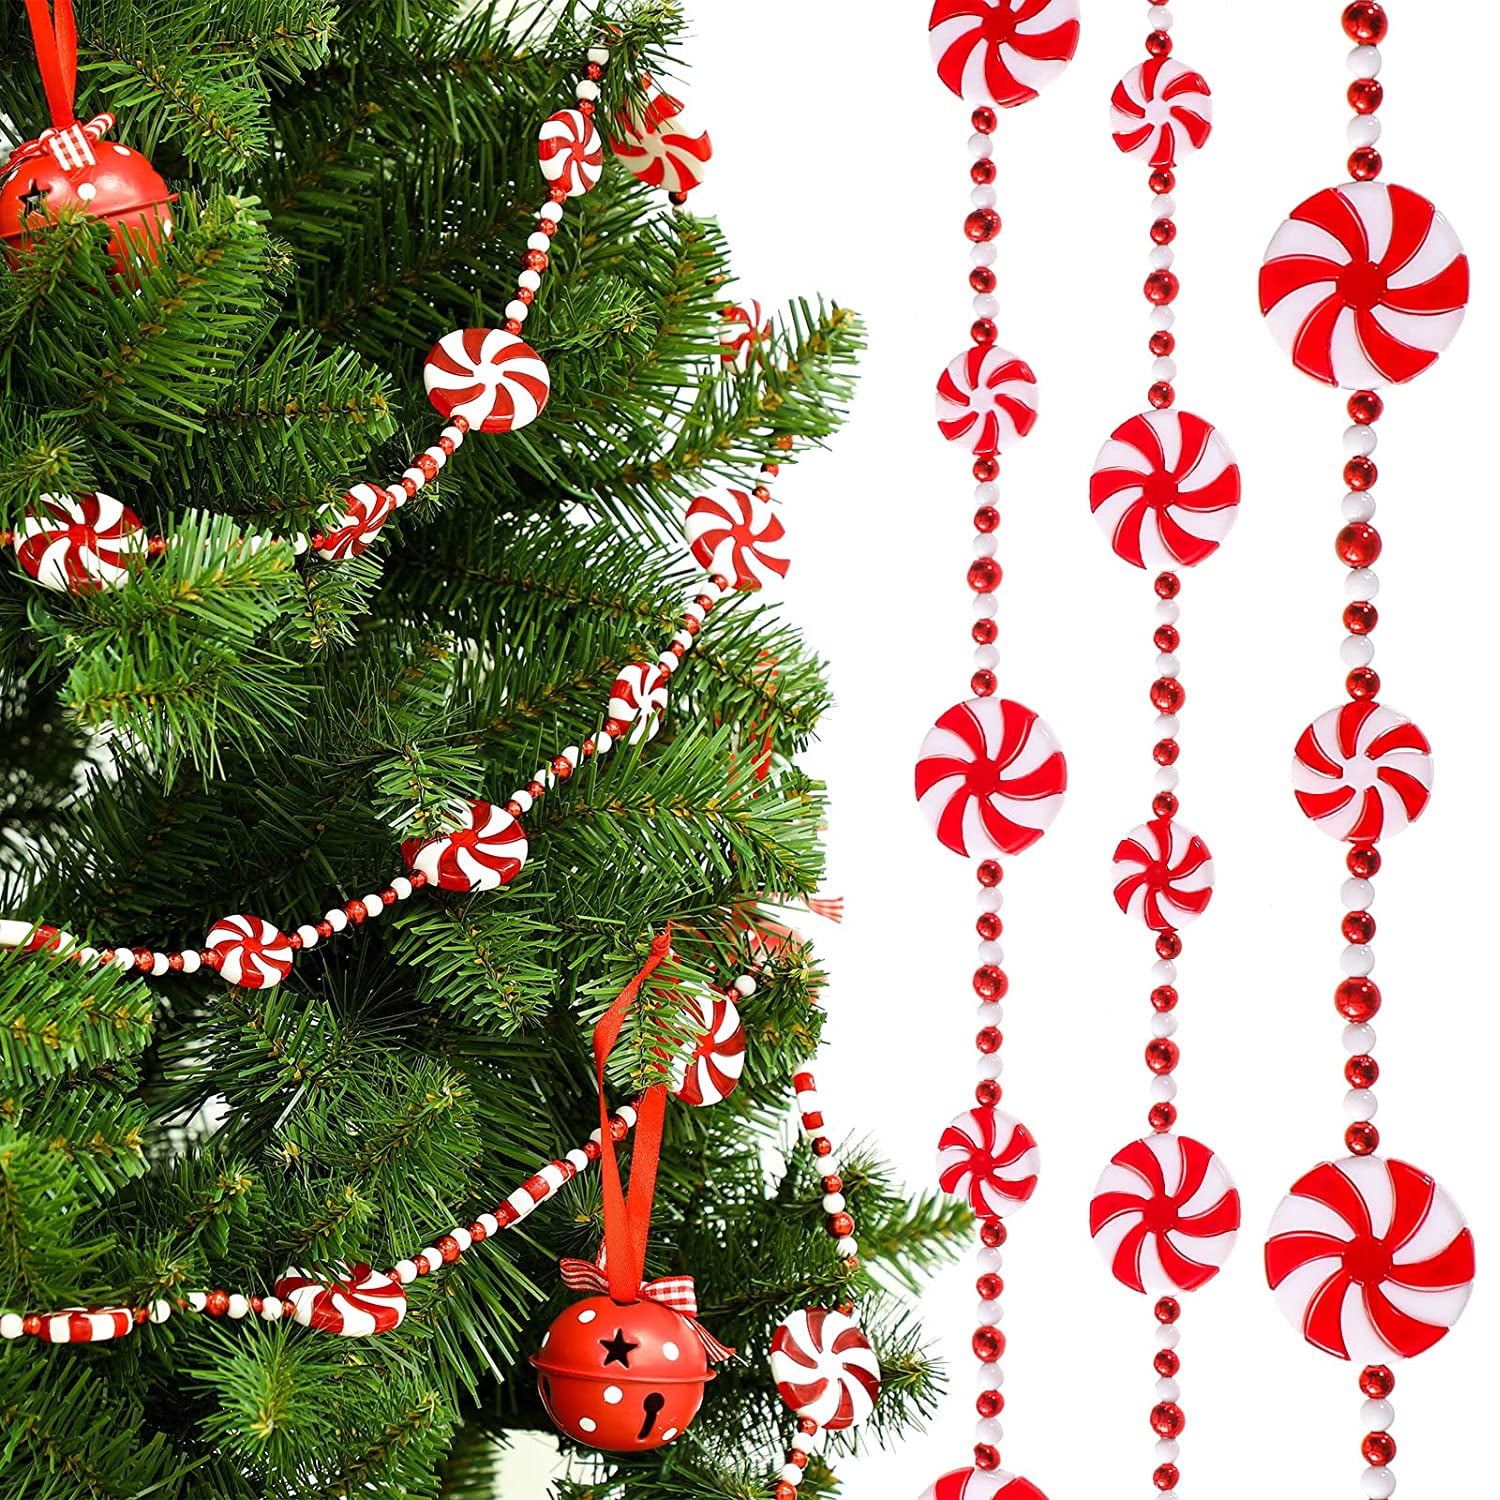 Husfou 10ft Christmas Candy Garland Peppermint Candy Garland ...